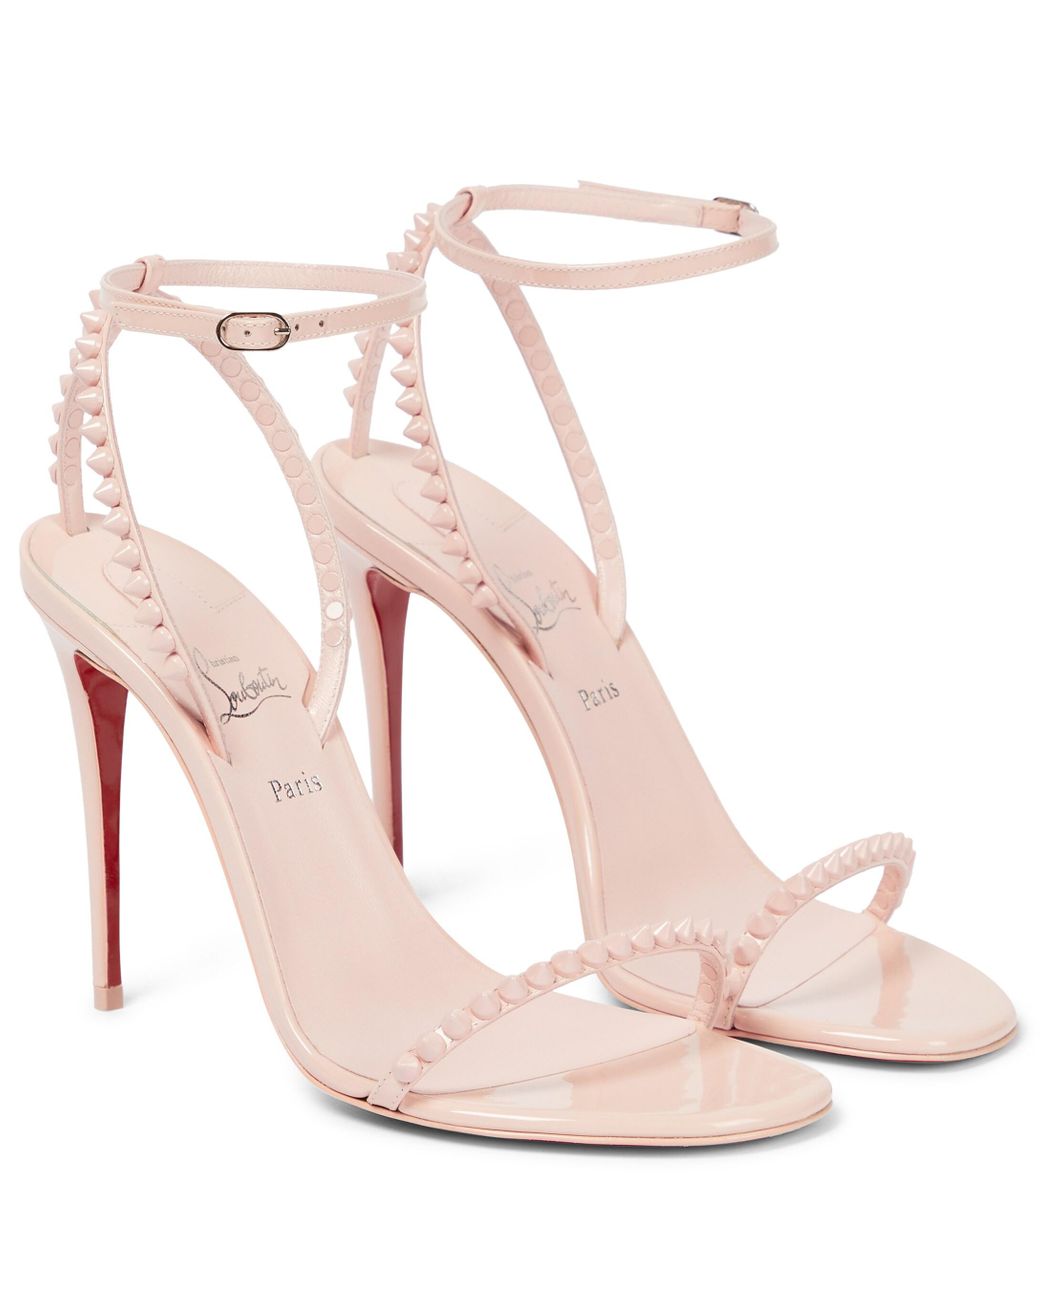 Christian Louboutin So Me 100 Leather Sandals in Pink | Lyst UK